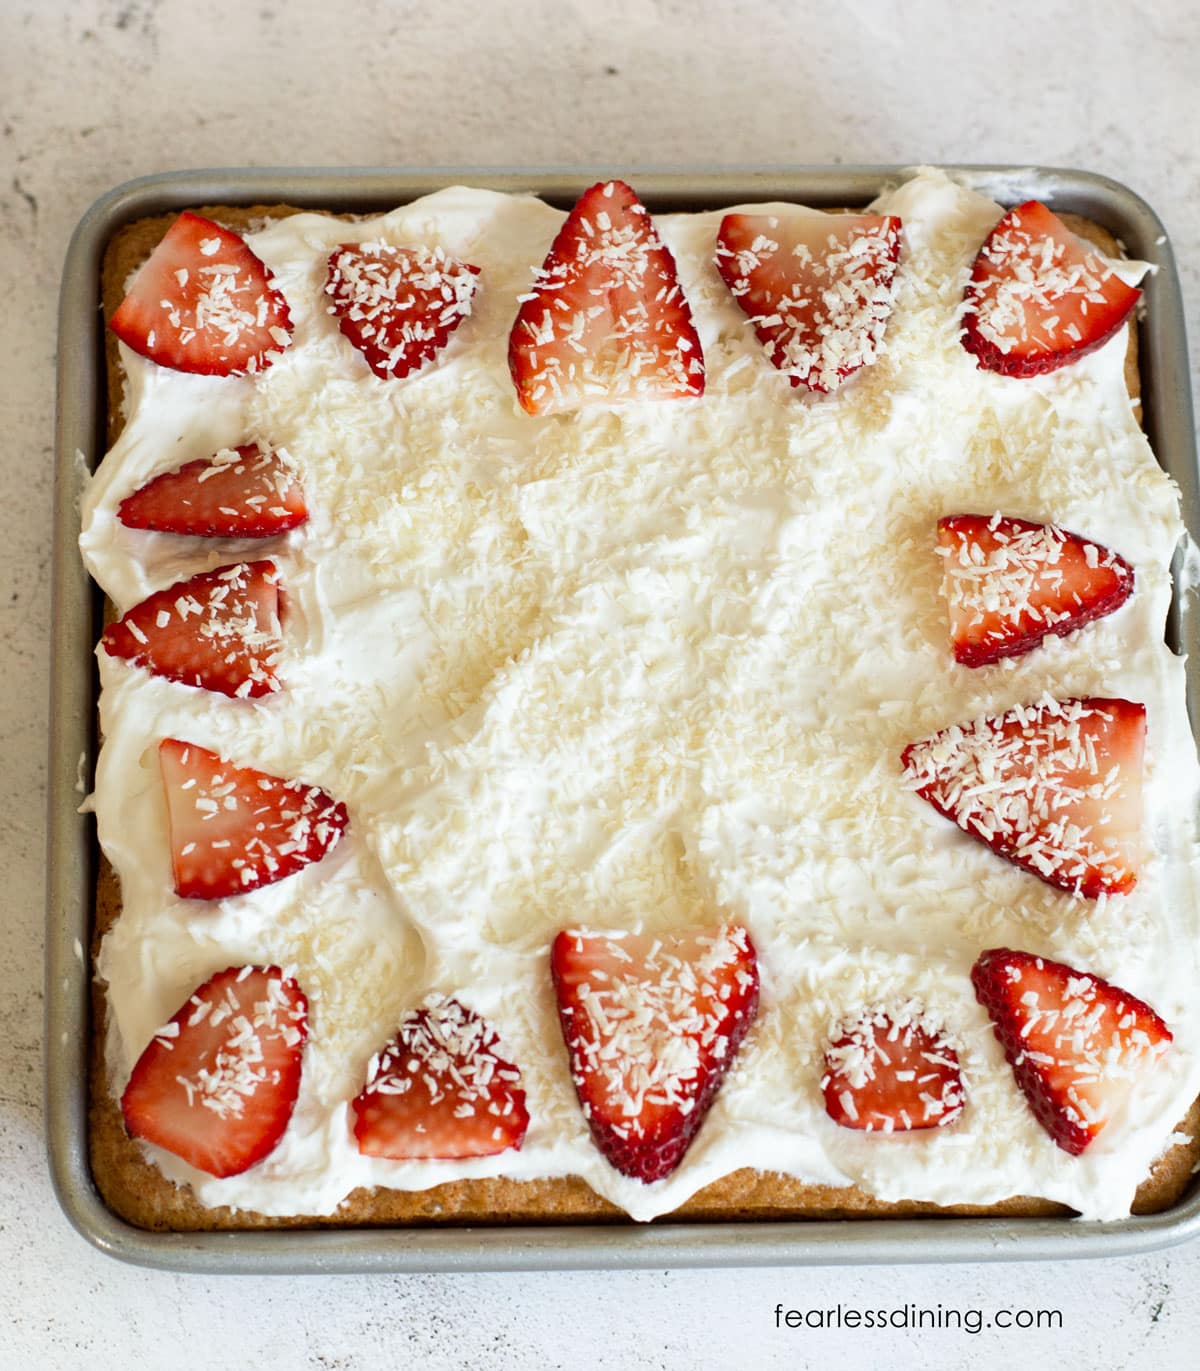 The top of a tres leches cake with strawberry slices and shredded coconut.